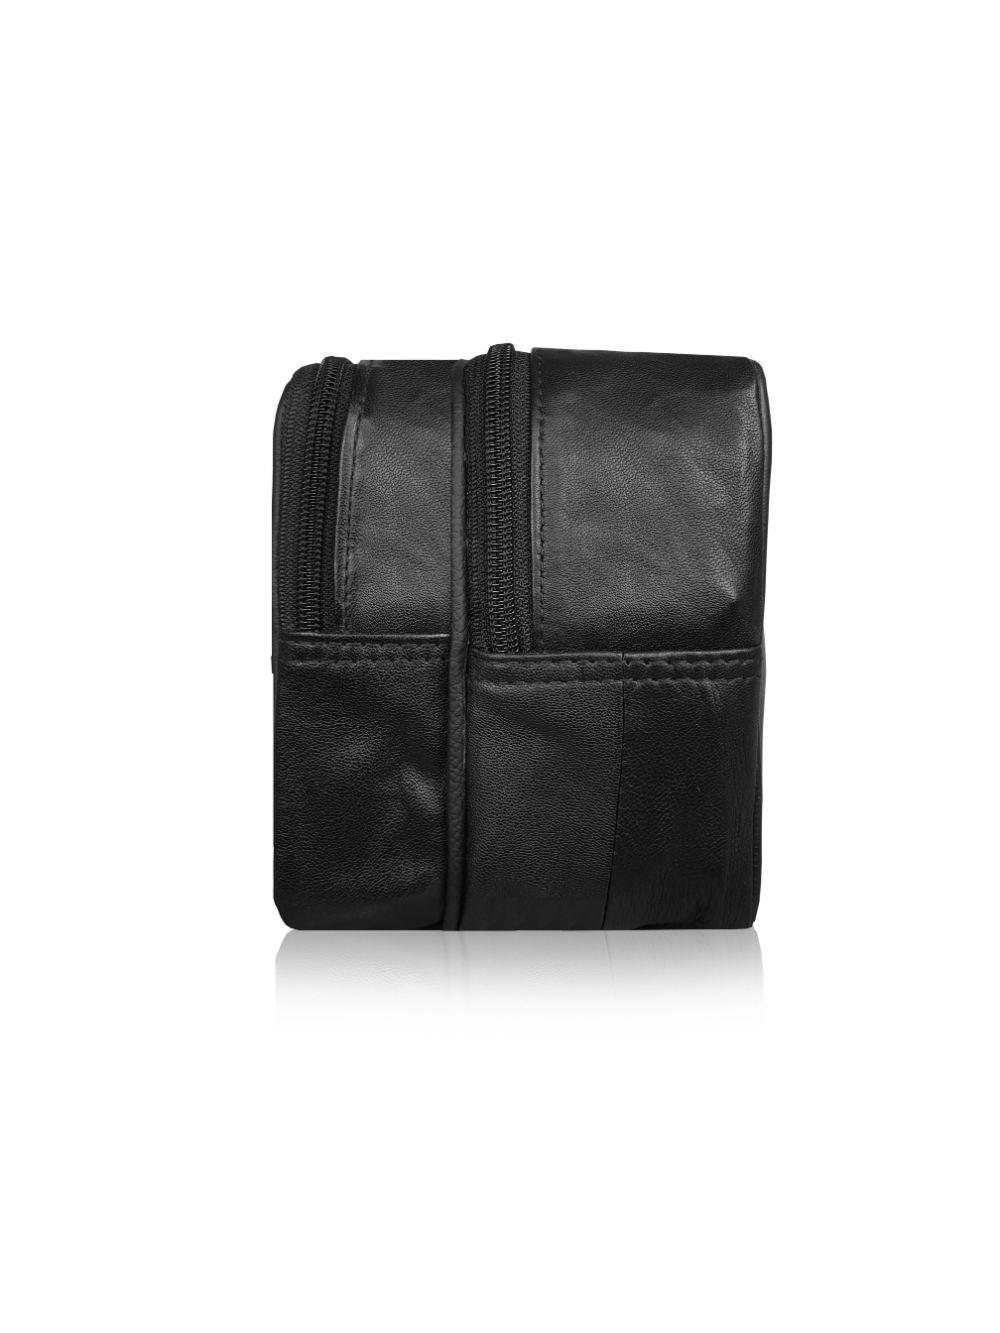 Genuine Leather Toiletry Bag - Travel Wash Bag With Carry Handle -R215